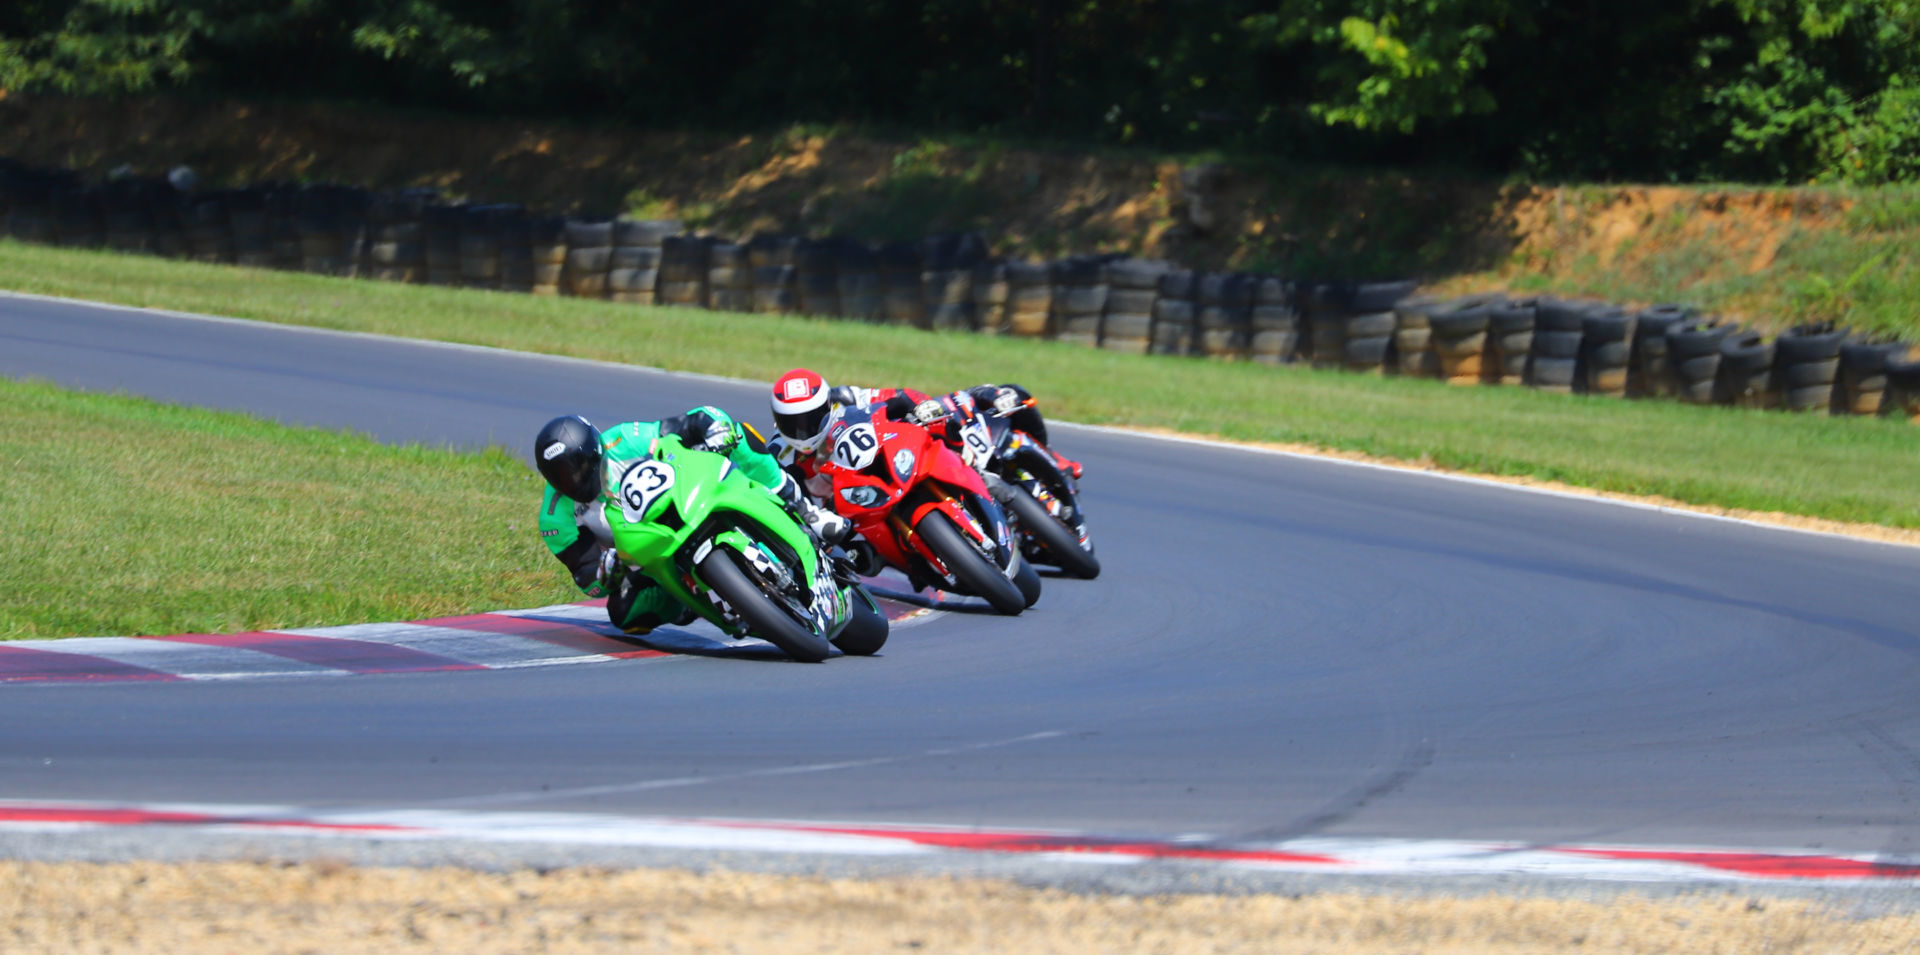 ASRA racers during a Team Challenge event at Summit Point Raceway in 2019. Photo by etechphoto.com, courtesy of ASRA/CCS.